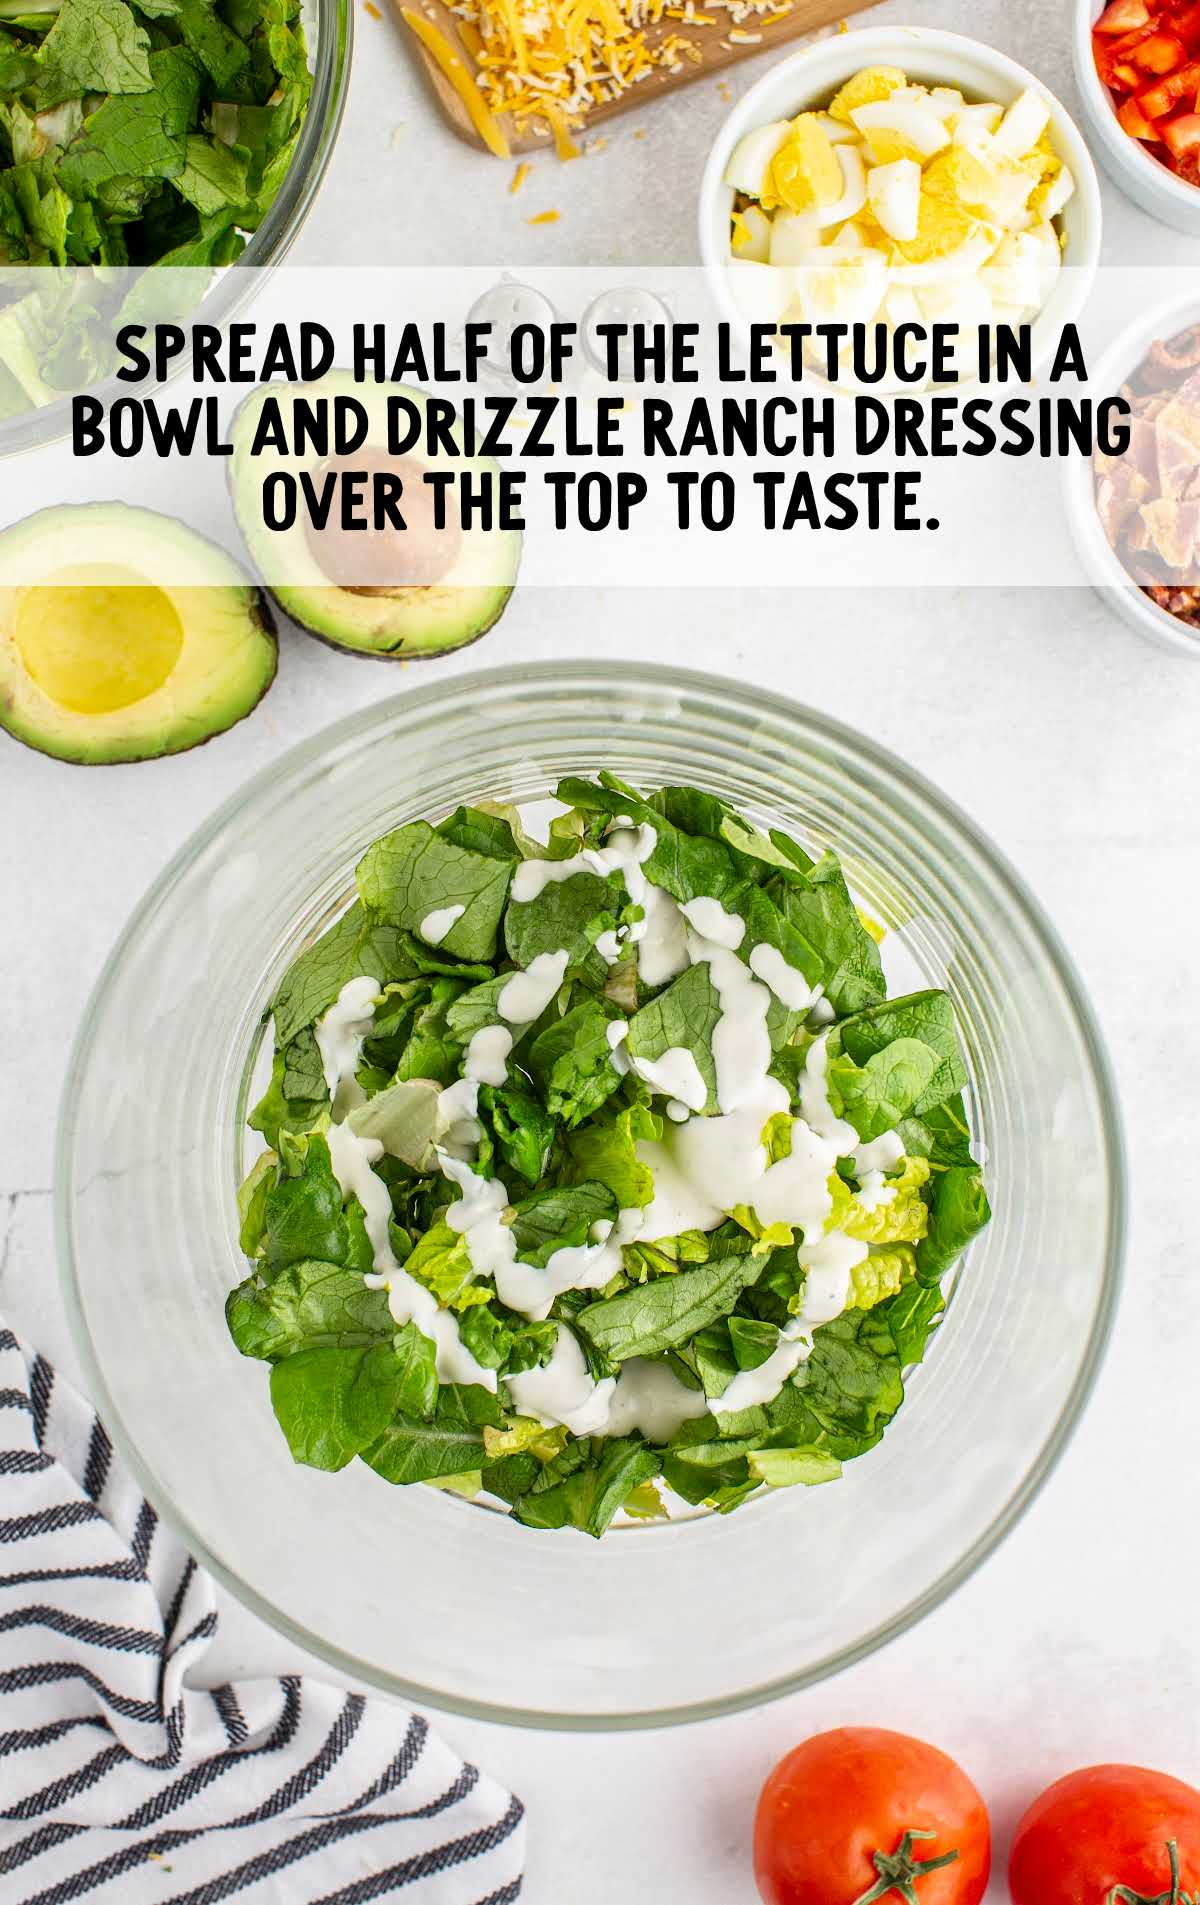 ranch dressing being poured over lettuce in a bowl